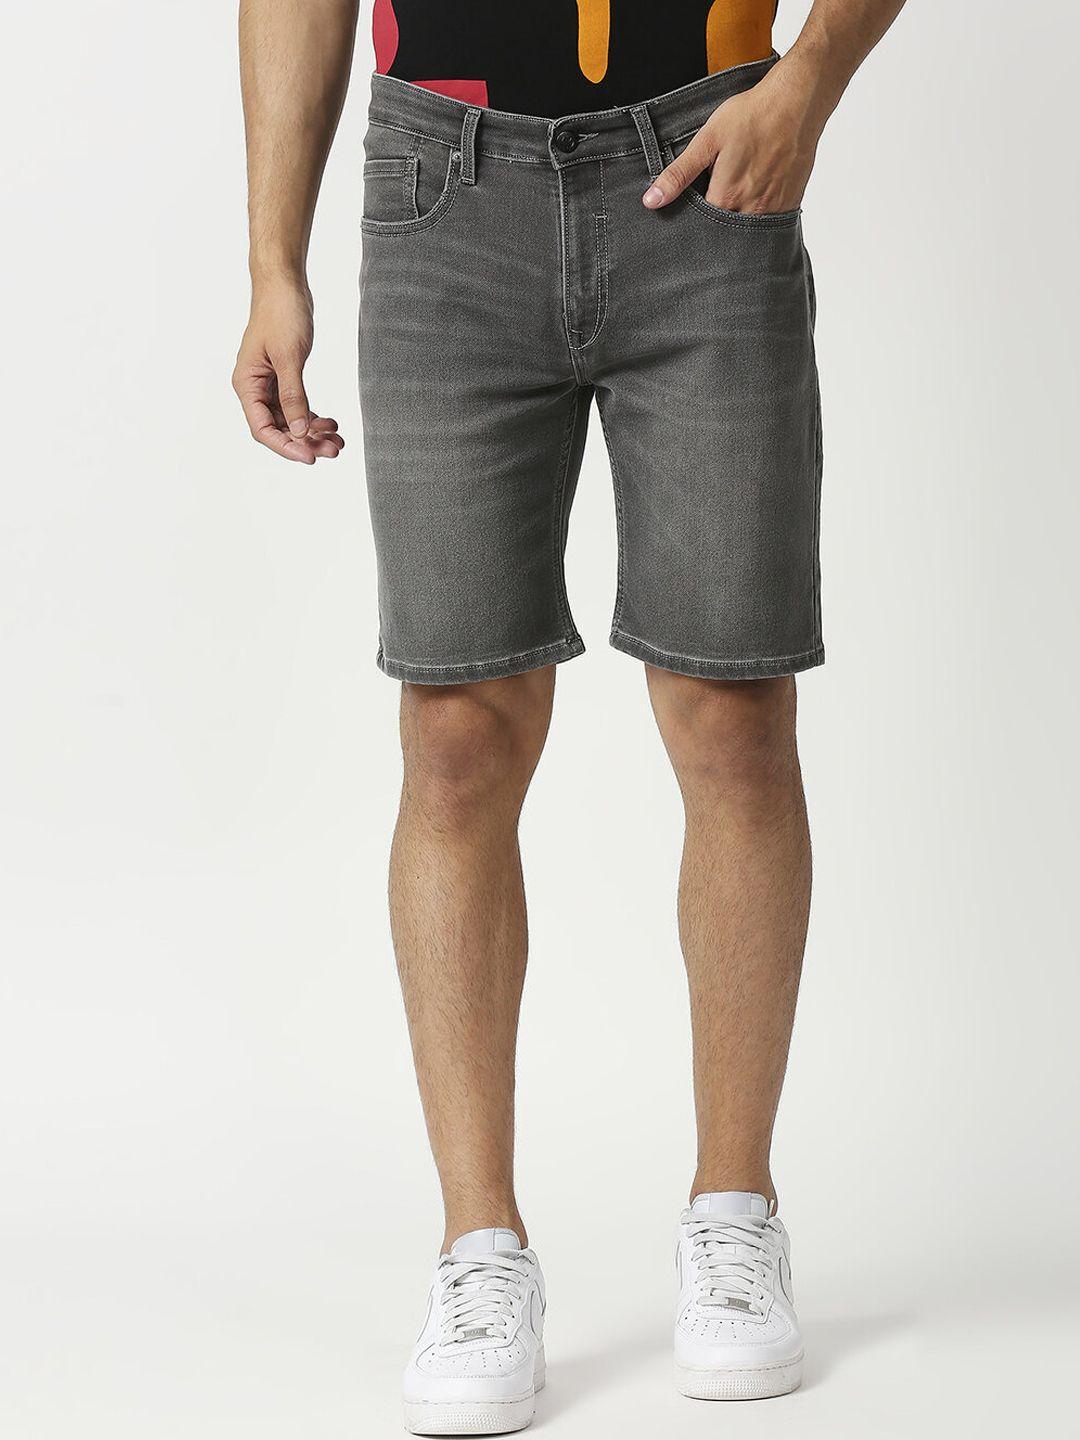 pepe-jeans-men-grey-washed-skinny-fit-cotton-chino-shorts